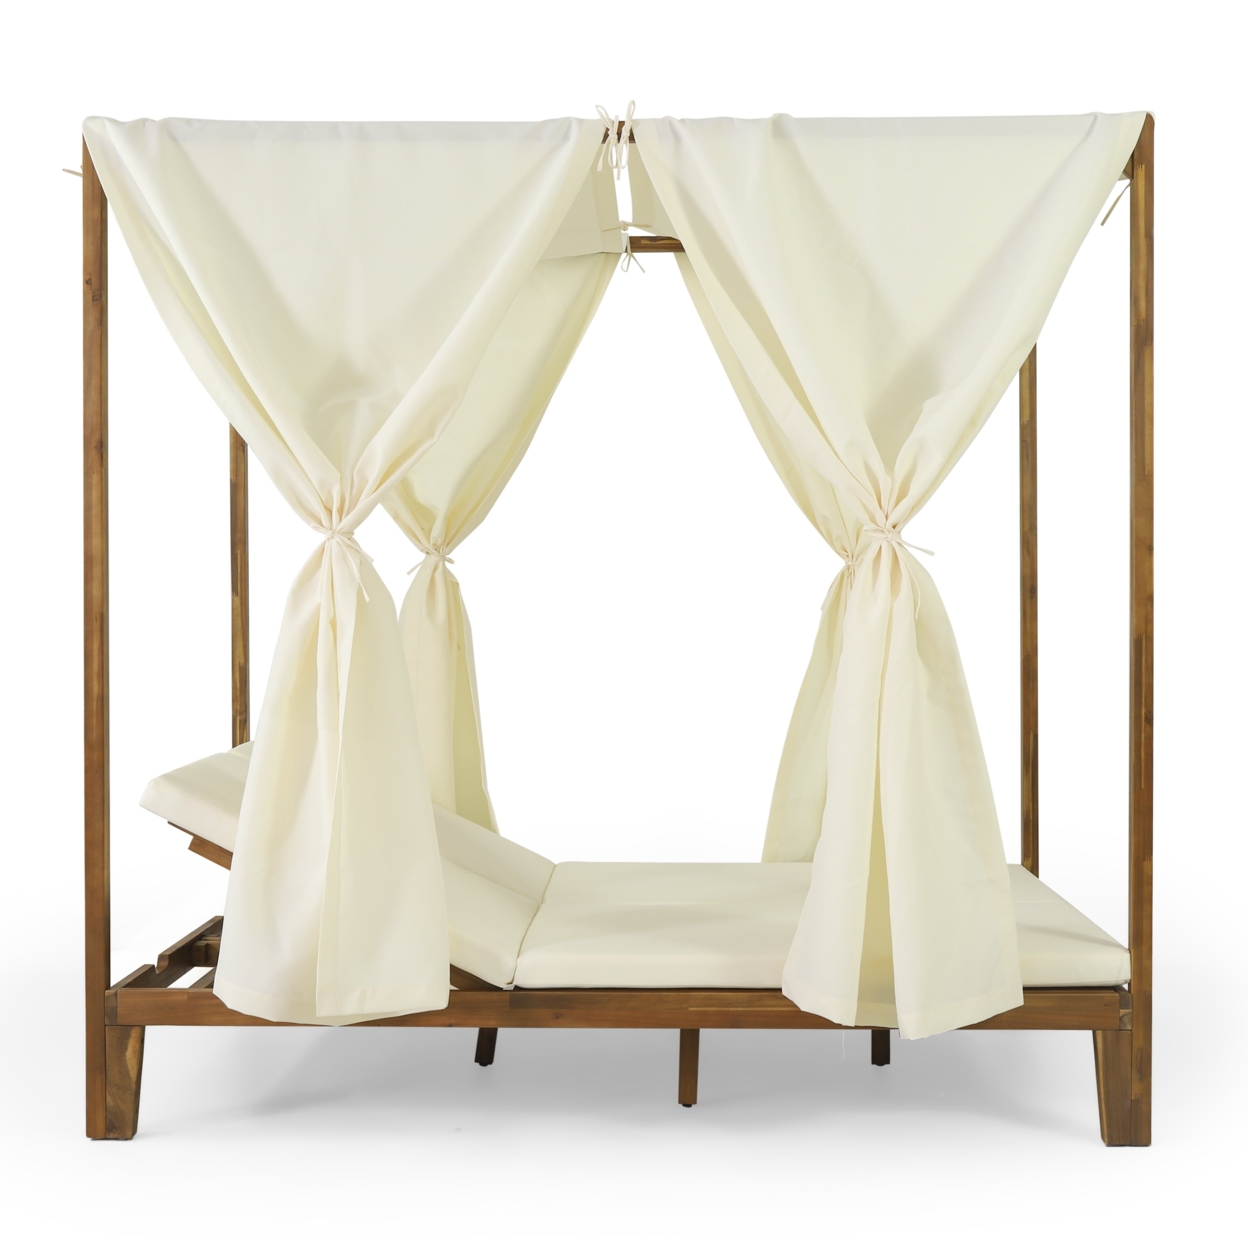 Leaverton Outdoor 2 Seater Adjustable Acacia Wood Daybed With Curtains - Teak Finish/dark Grey